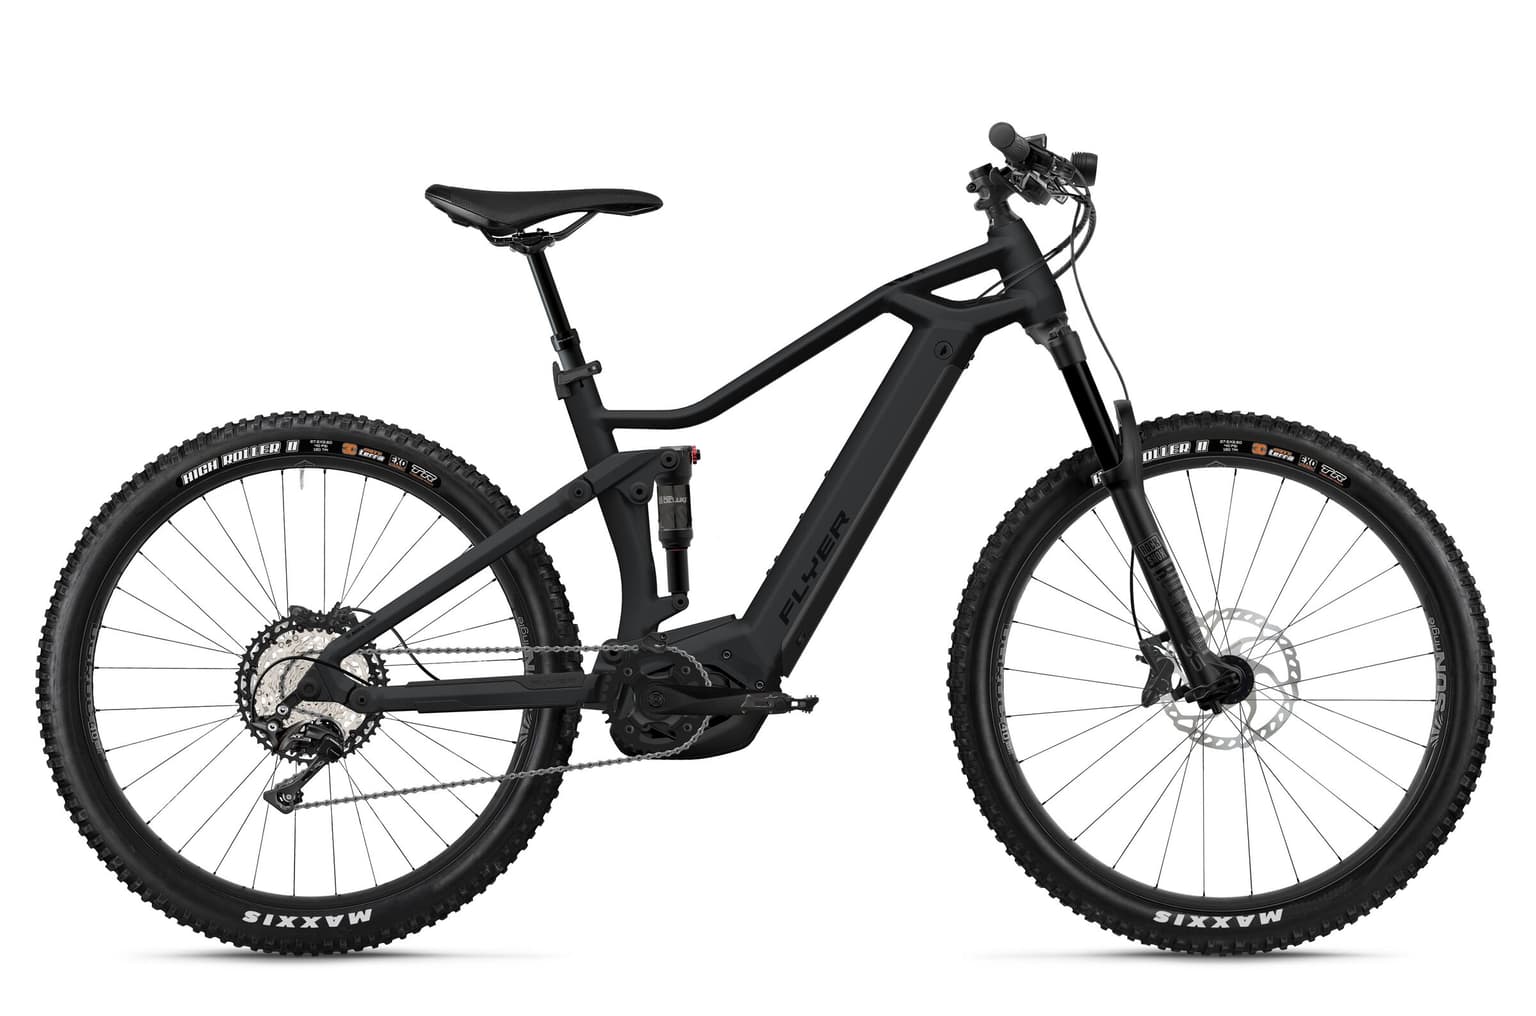 FLYER FLYER Uproc3 6.30 27.5 E-Mountainbike (Fully) antracite 1